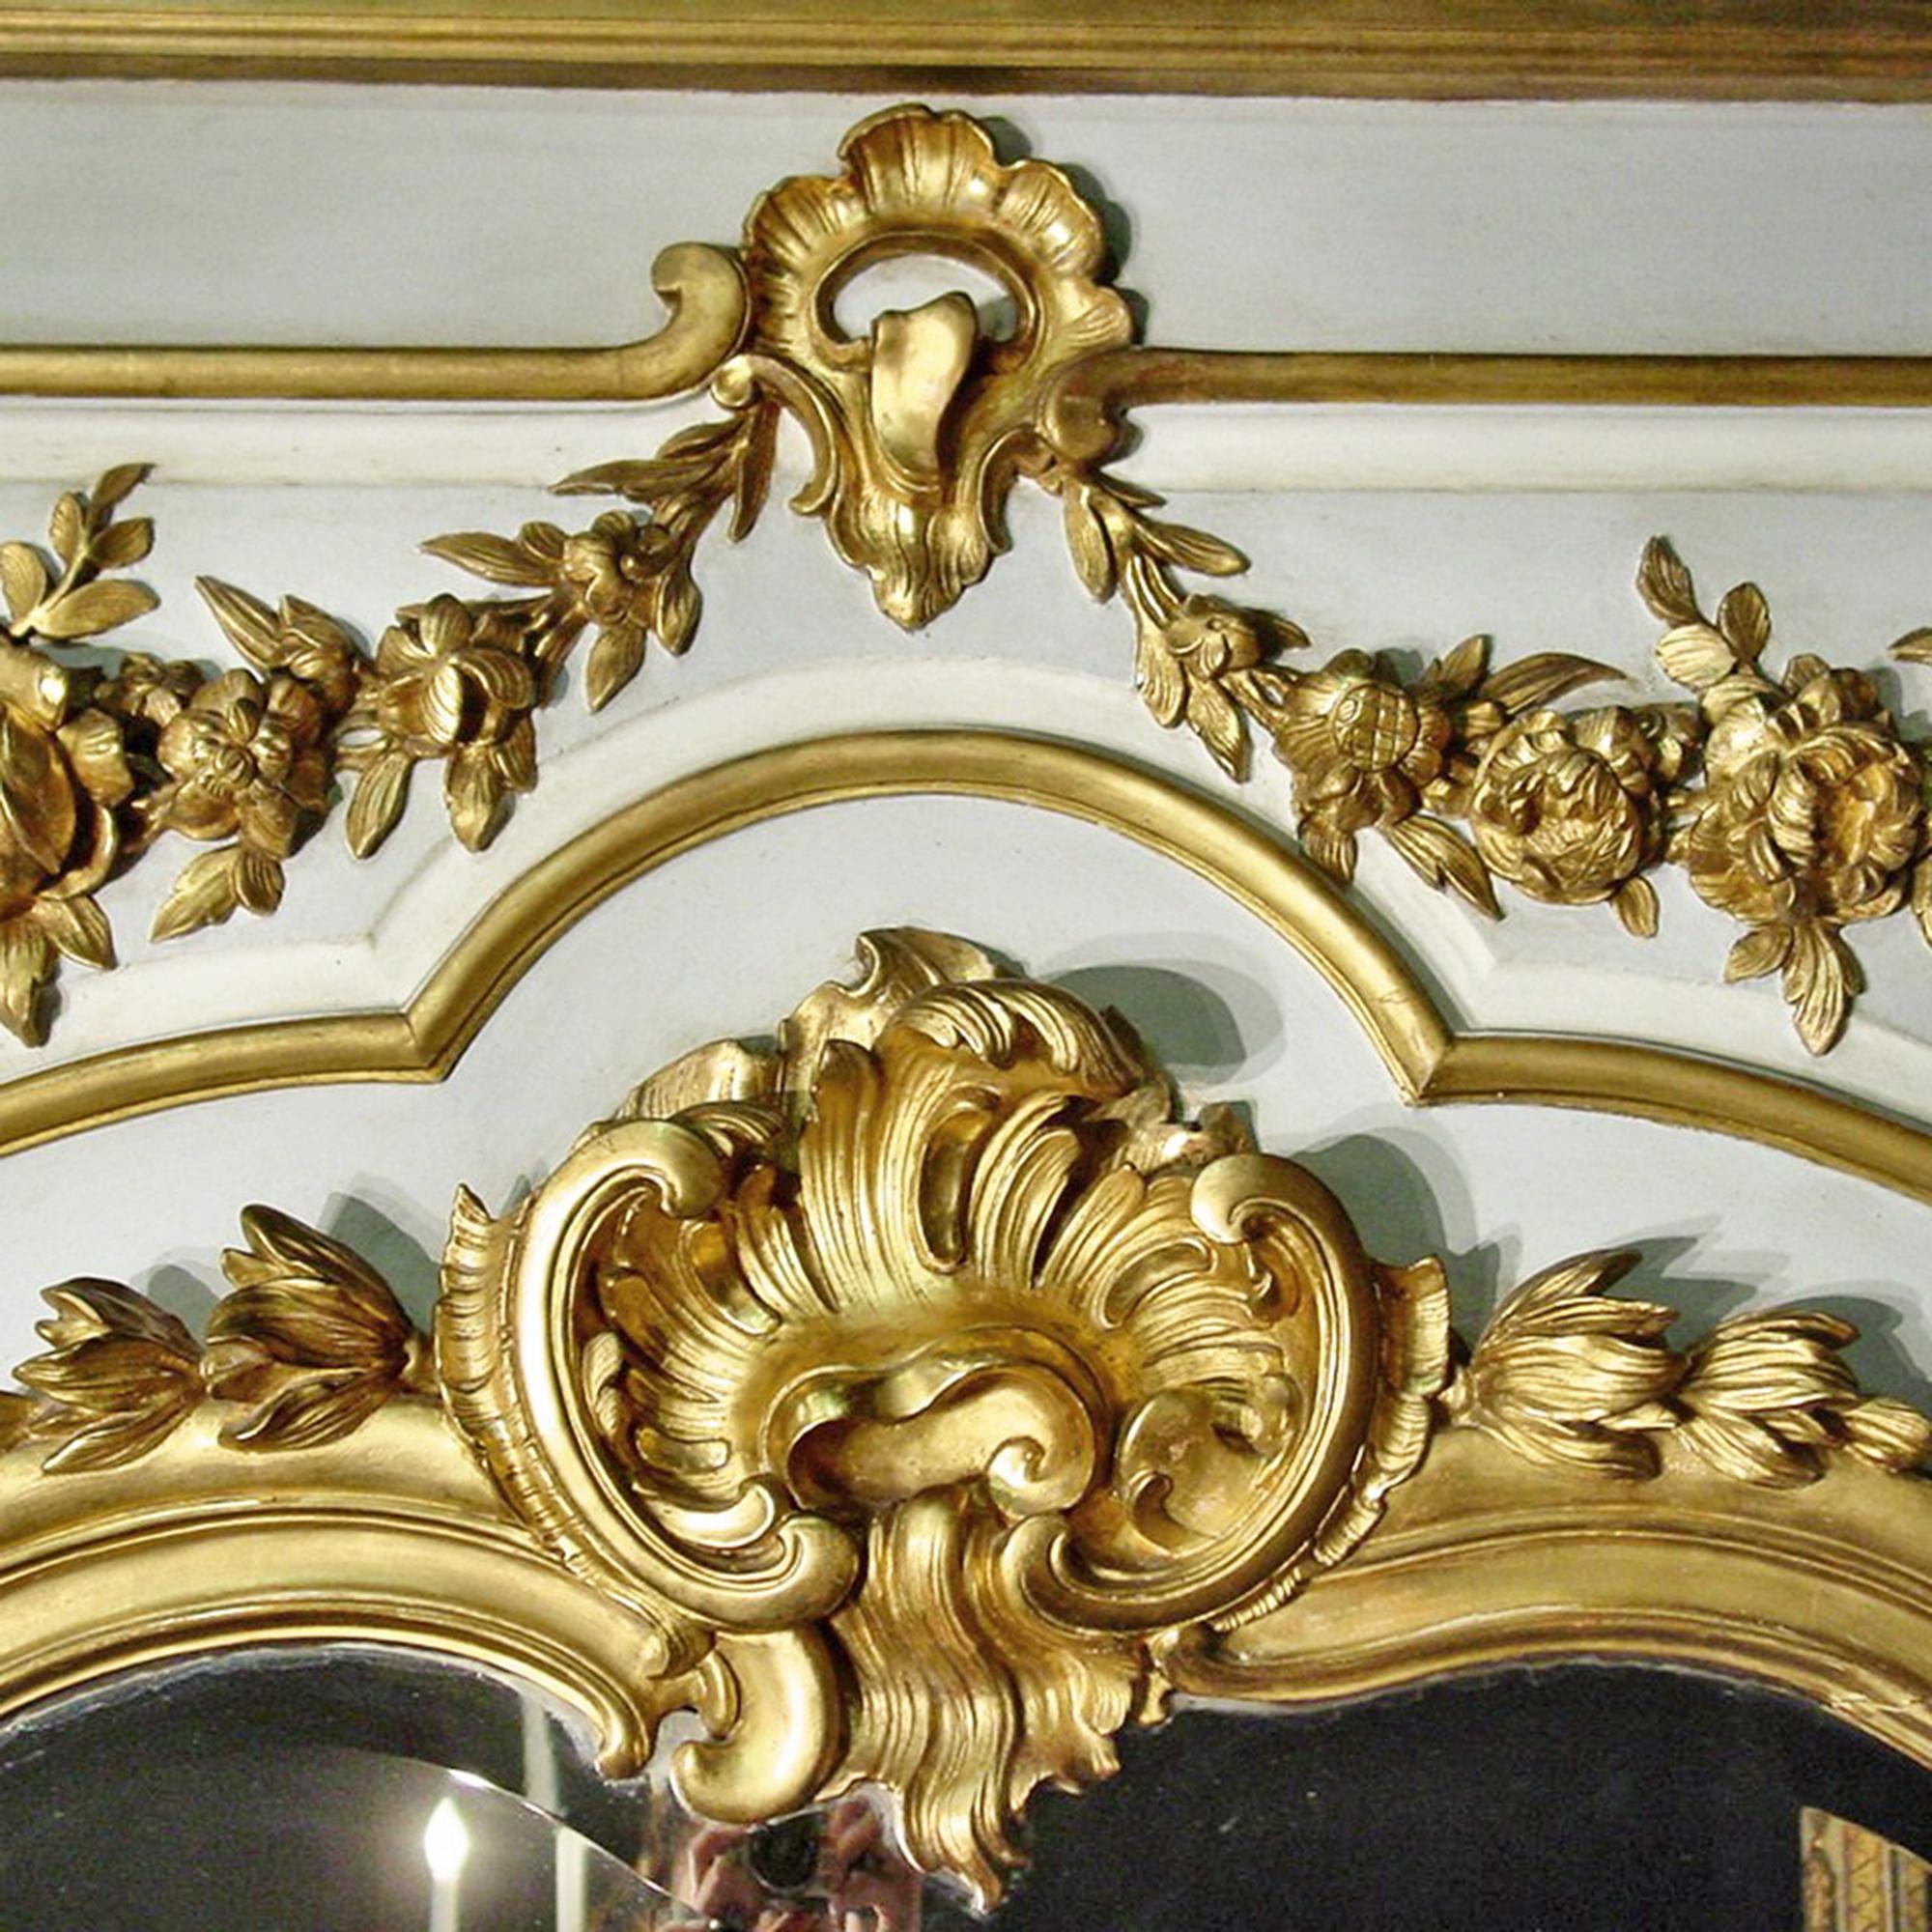 A Louis XV style patinated and giltwood boiseries element, 19th century, circa 1840. The rectangular panel is fitted with a shaped beveled mirror plate surrounded by giltwood borders incorporating Floral and foliate swags and surmounted by a shell